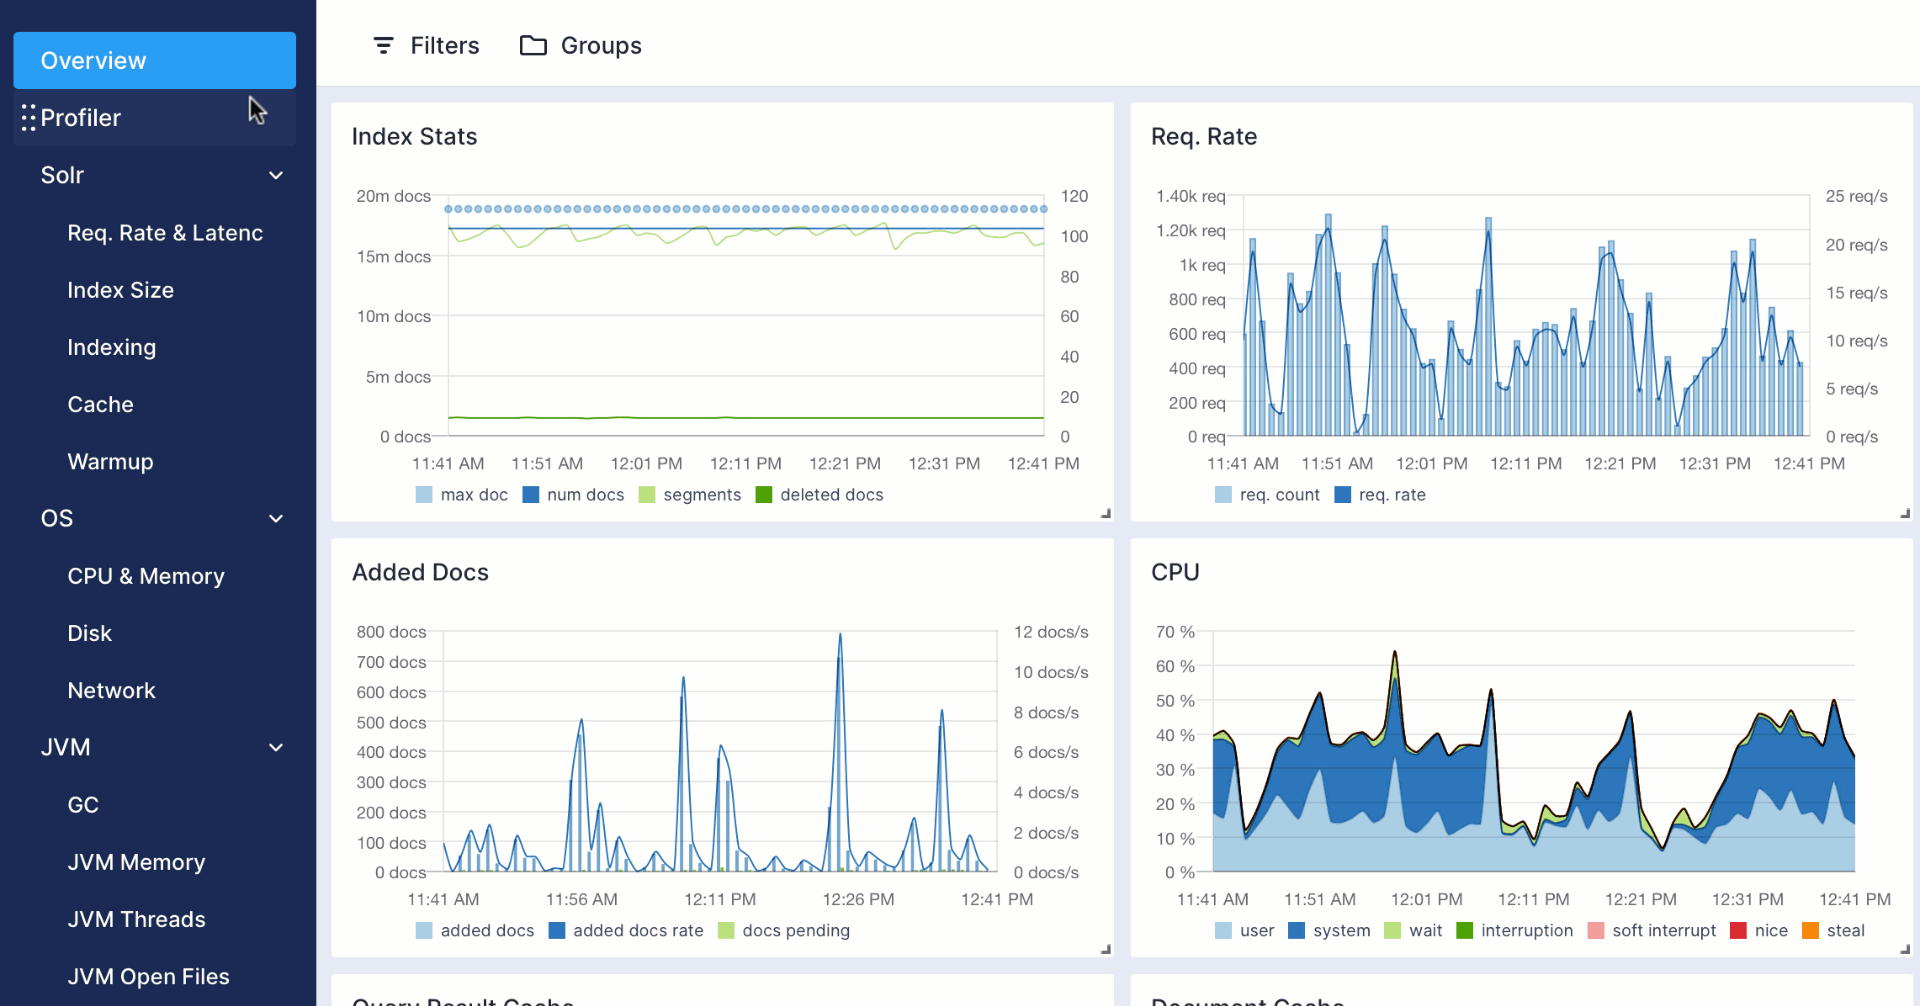 Monitor key Solr & SolrCloud metrics for Real-Time Visibility into Your Environment